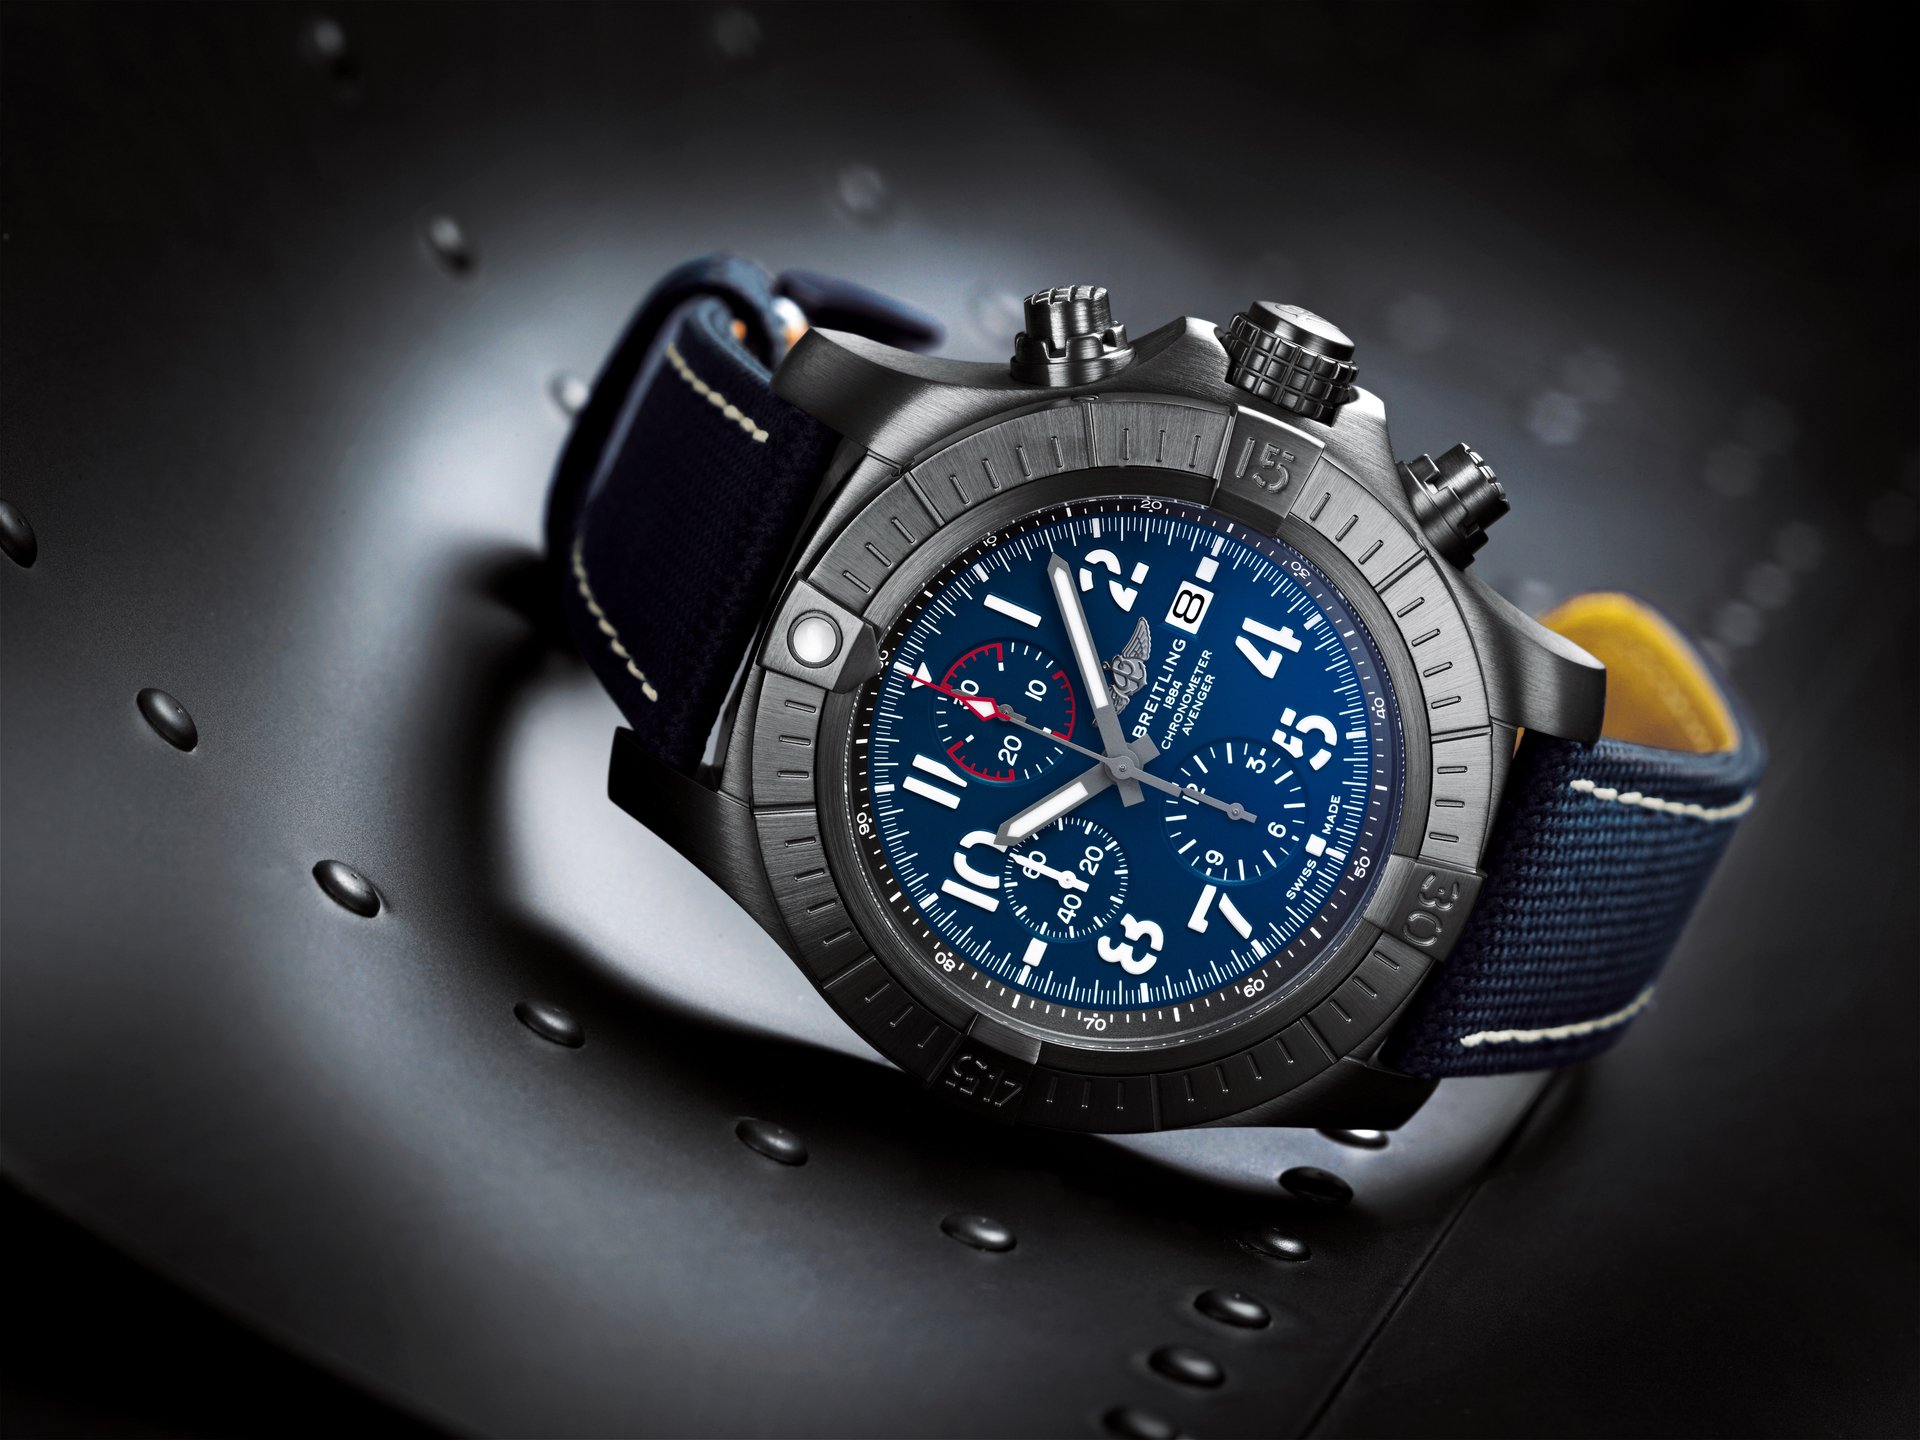 The new Breitling Superocean Collection 